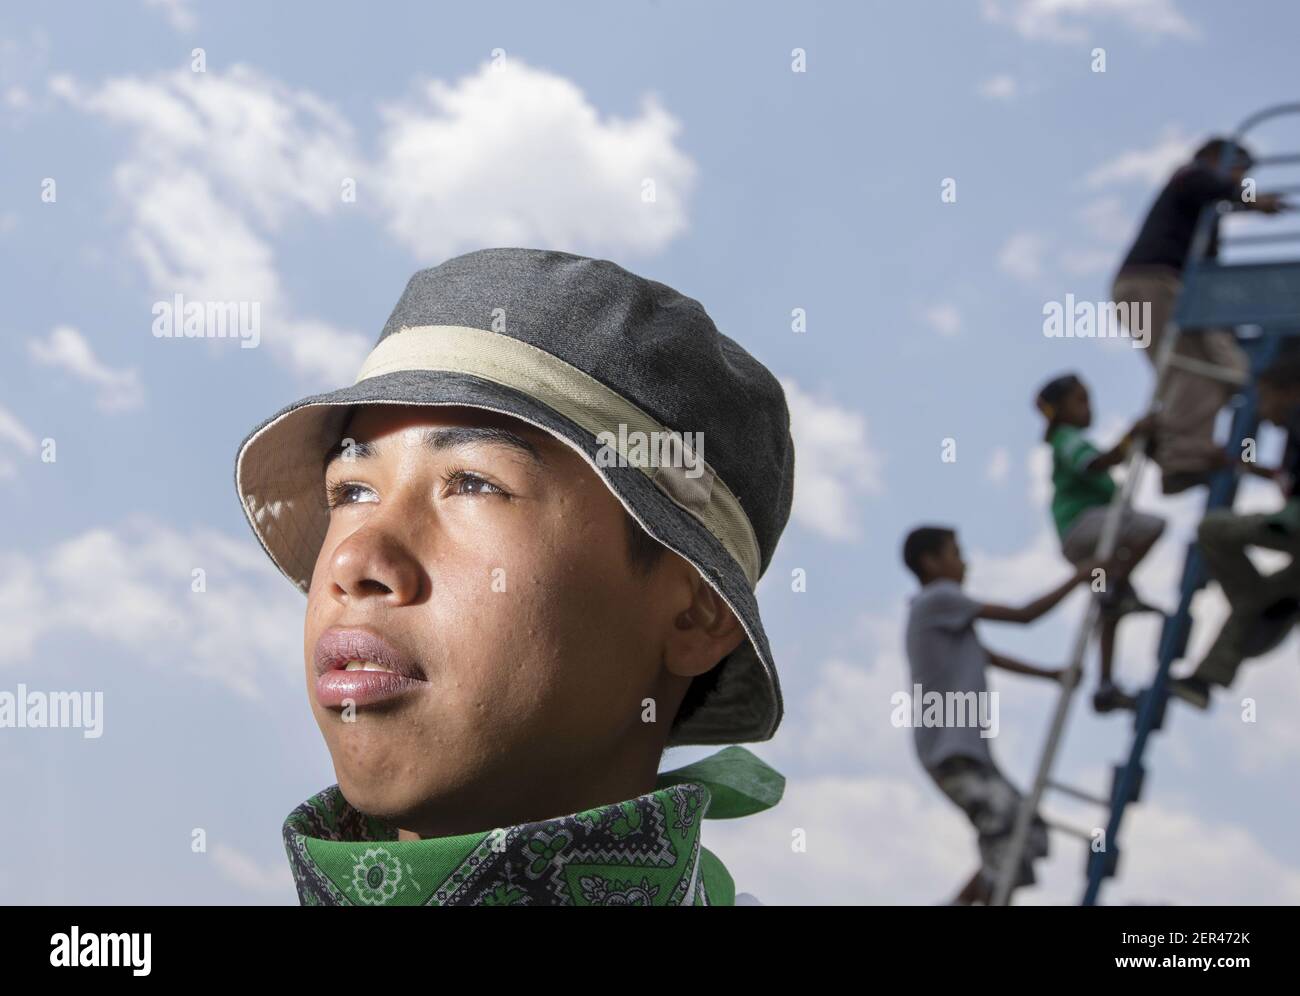 Apr 7, 2018; Puebla, MEXICO; Portrait of Exel Giron,15, from Tegucigalpa Honduras and other Central American migrants outside a church wait for food in Puebla, Mexico for a caravan hoped to travel to the US border drawing the ire of President Donald Trump. Mandatory Credit: Nick Oza/The Arizona Republic via USA TODAY NETWORK/Sipa USA Stock Photo